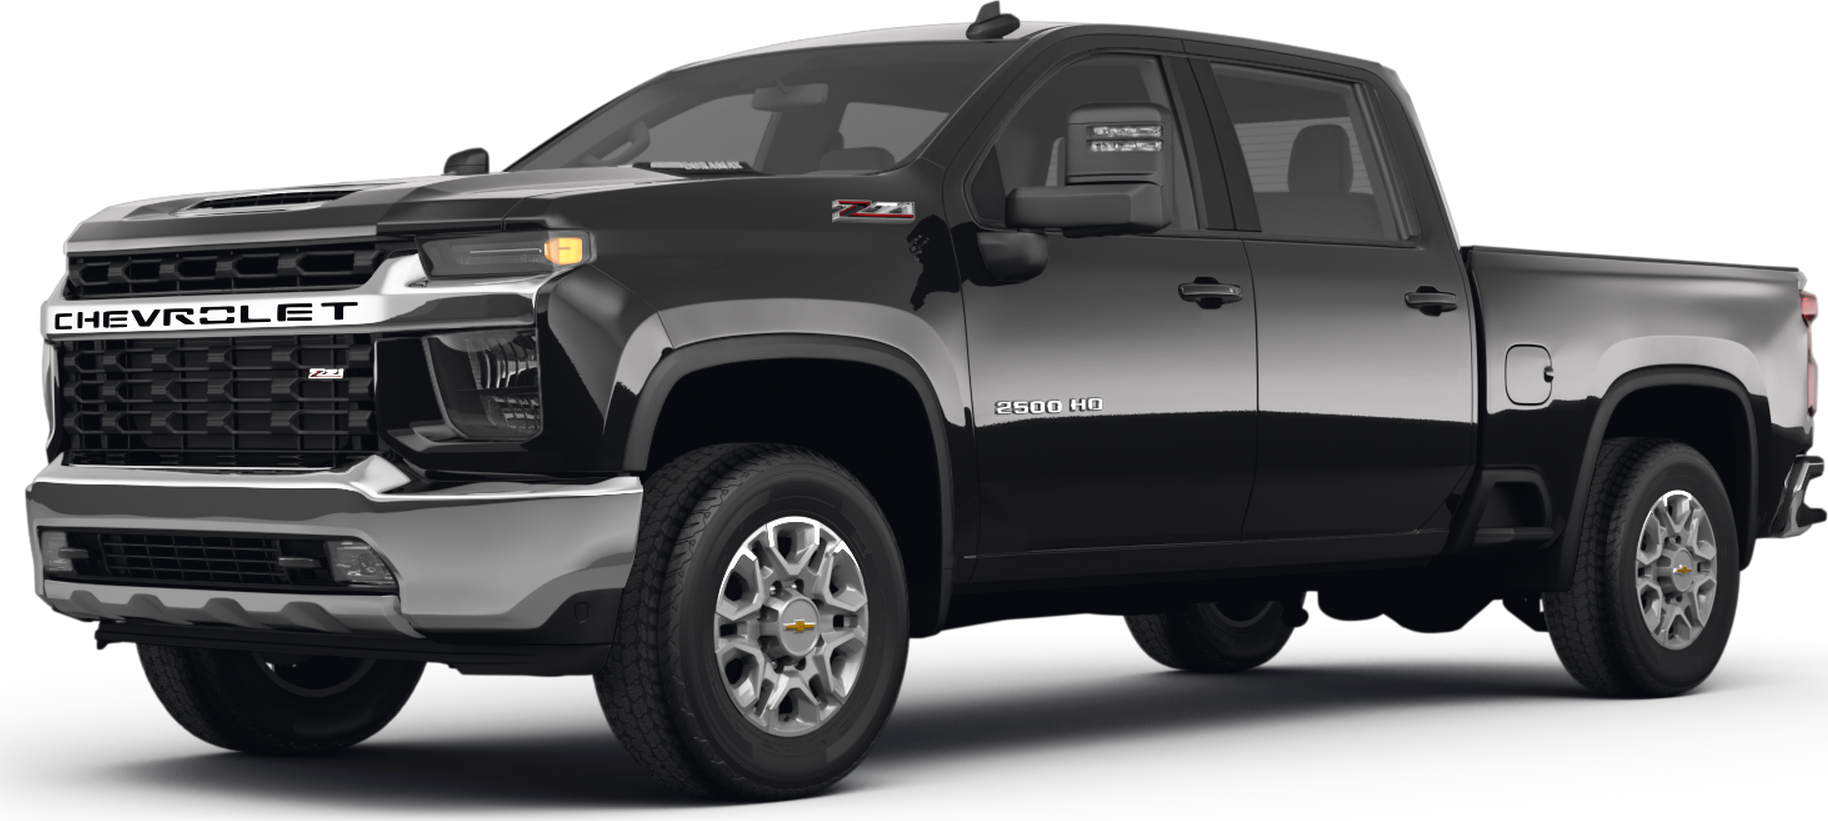 2022 Chevy Silverado 2500 Hd Crew Cab Price Reviews Pictures And More